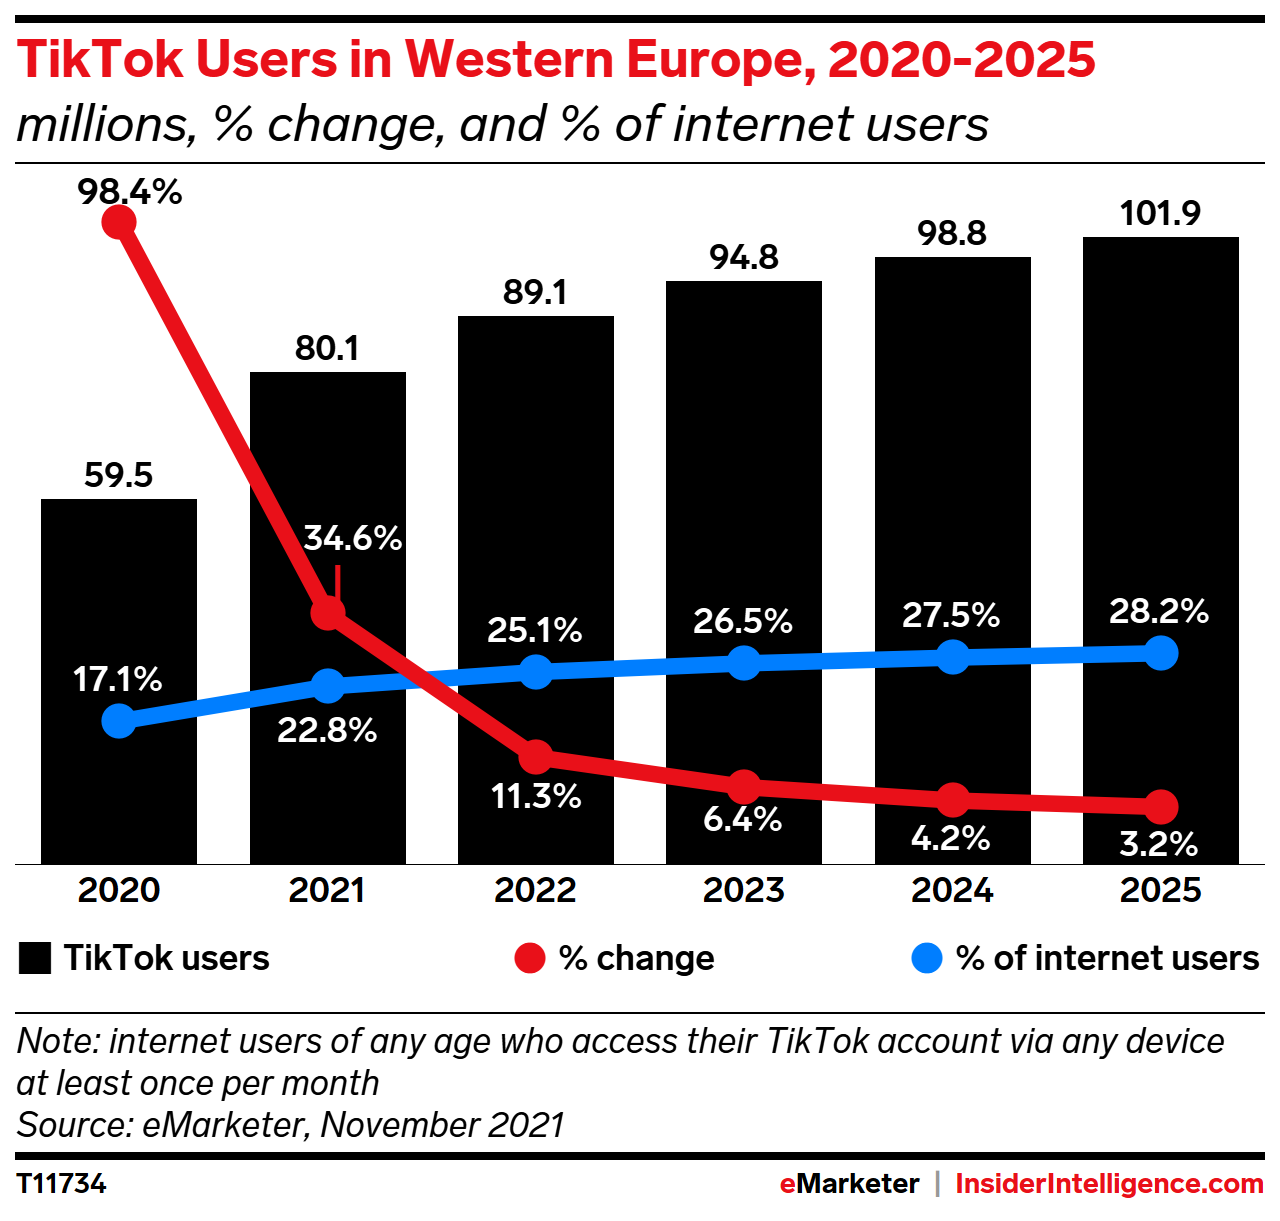 TikTok Users in Western Europe, 2020-2025 (millions, % change, and % of internet users)